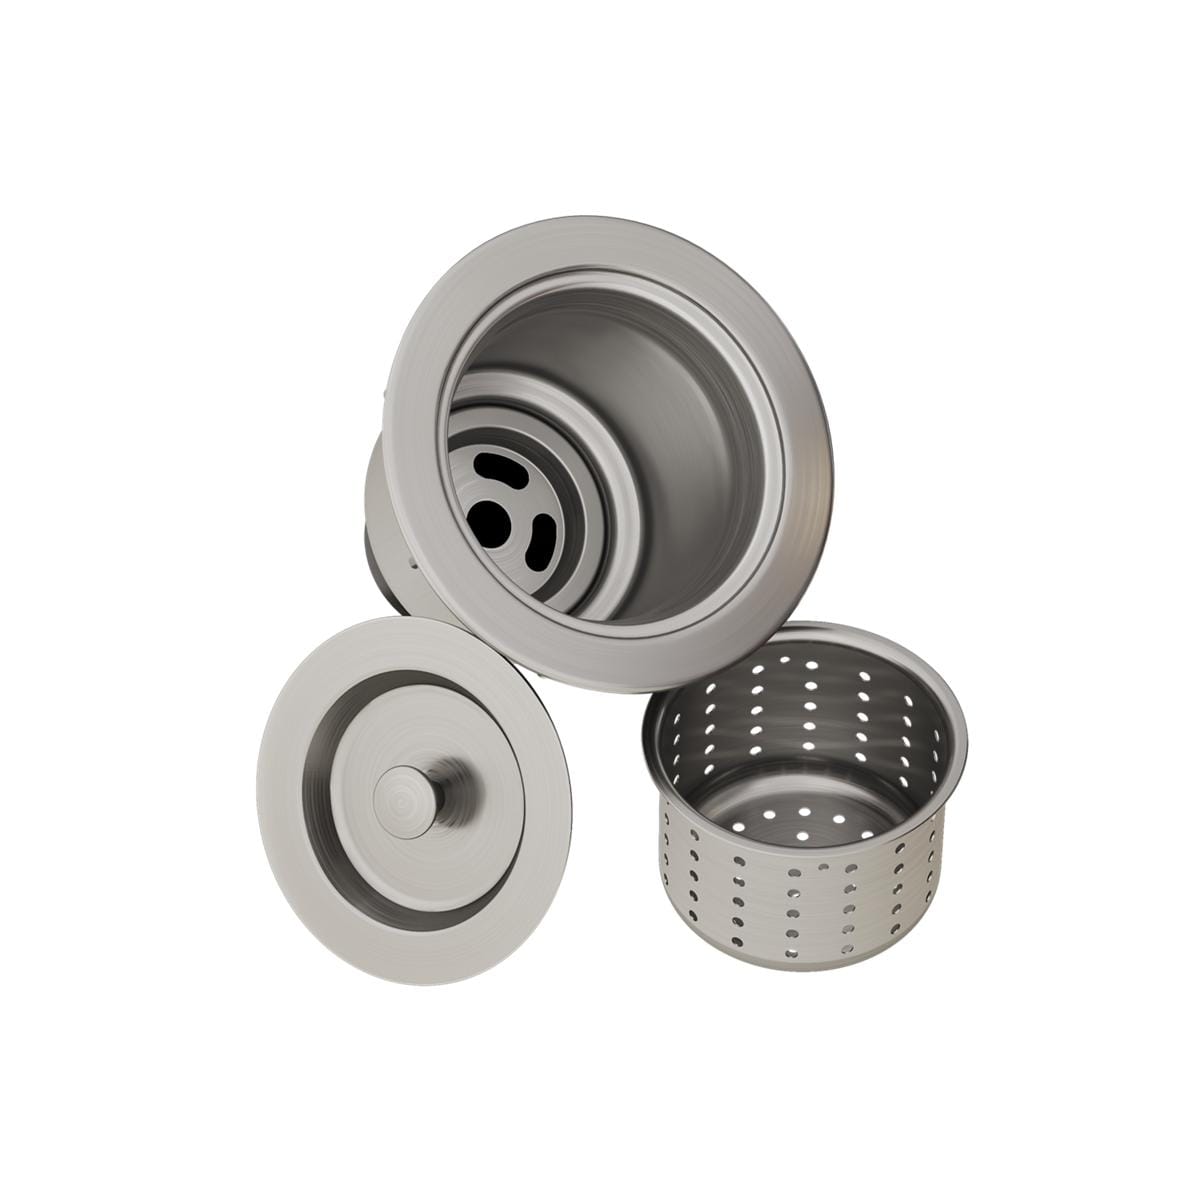 3.5 - 4 Kitchen Sink Drain with Removable Basket Strainer and